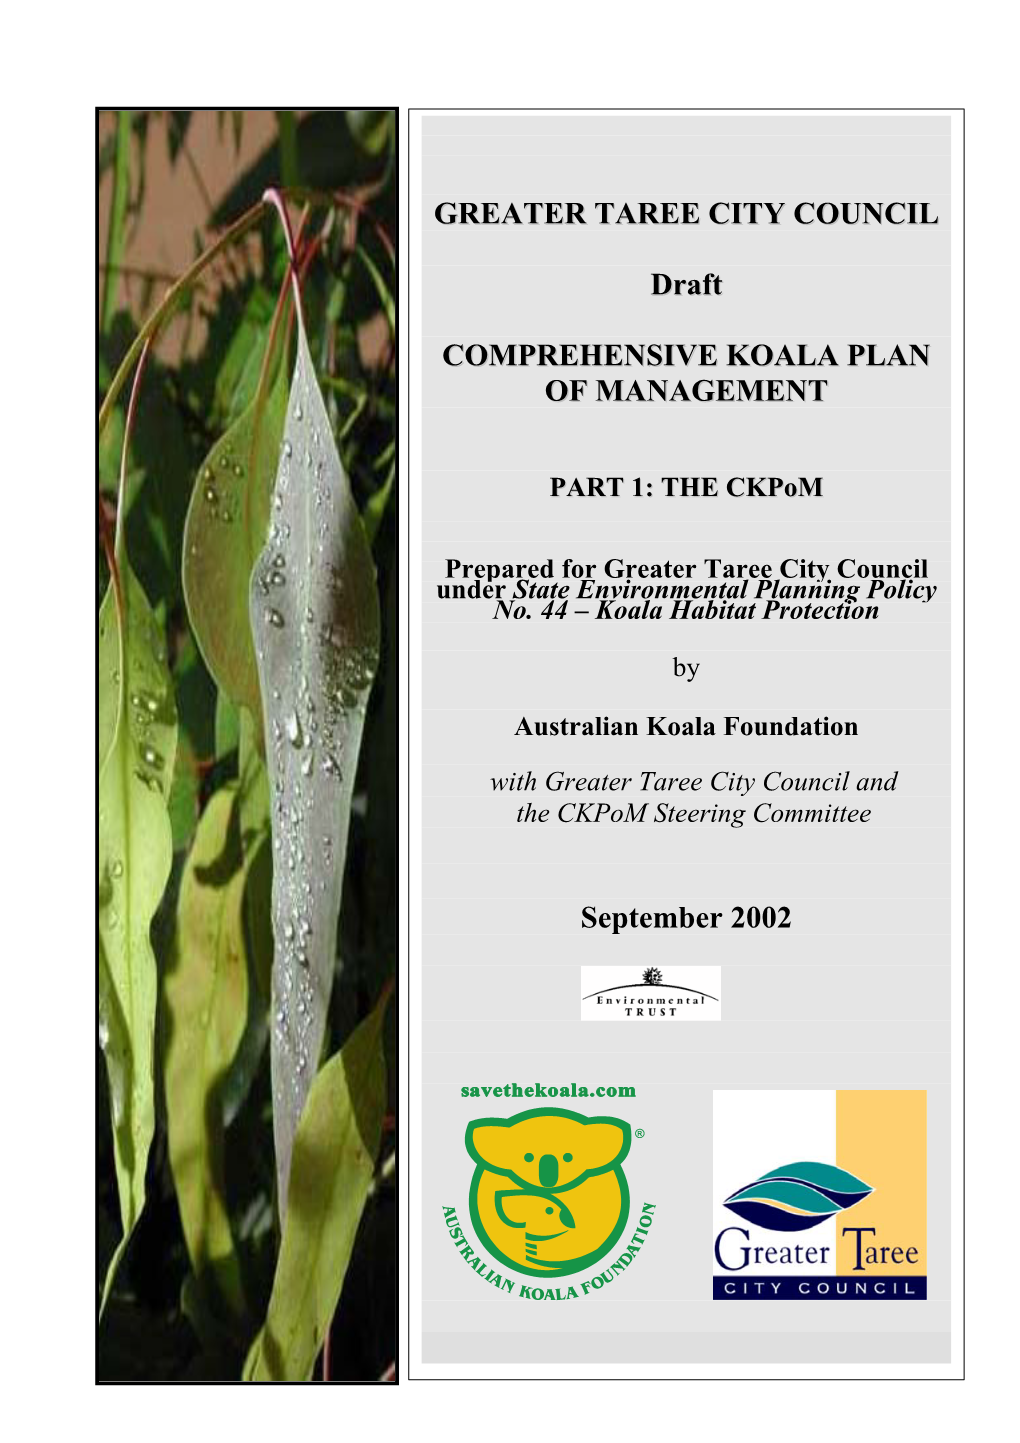 Greater Taree City Council Comprehensive Koala Plan of Management (Part 1:The Ckpom)